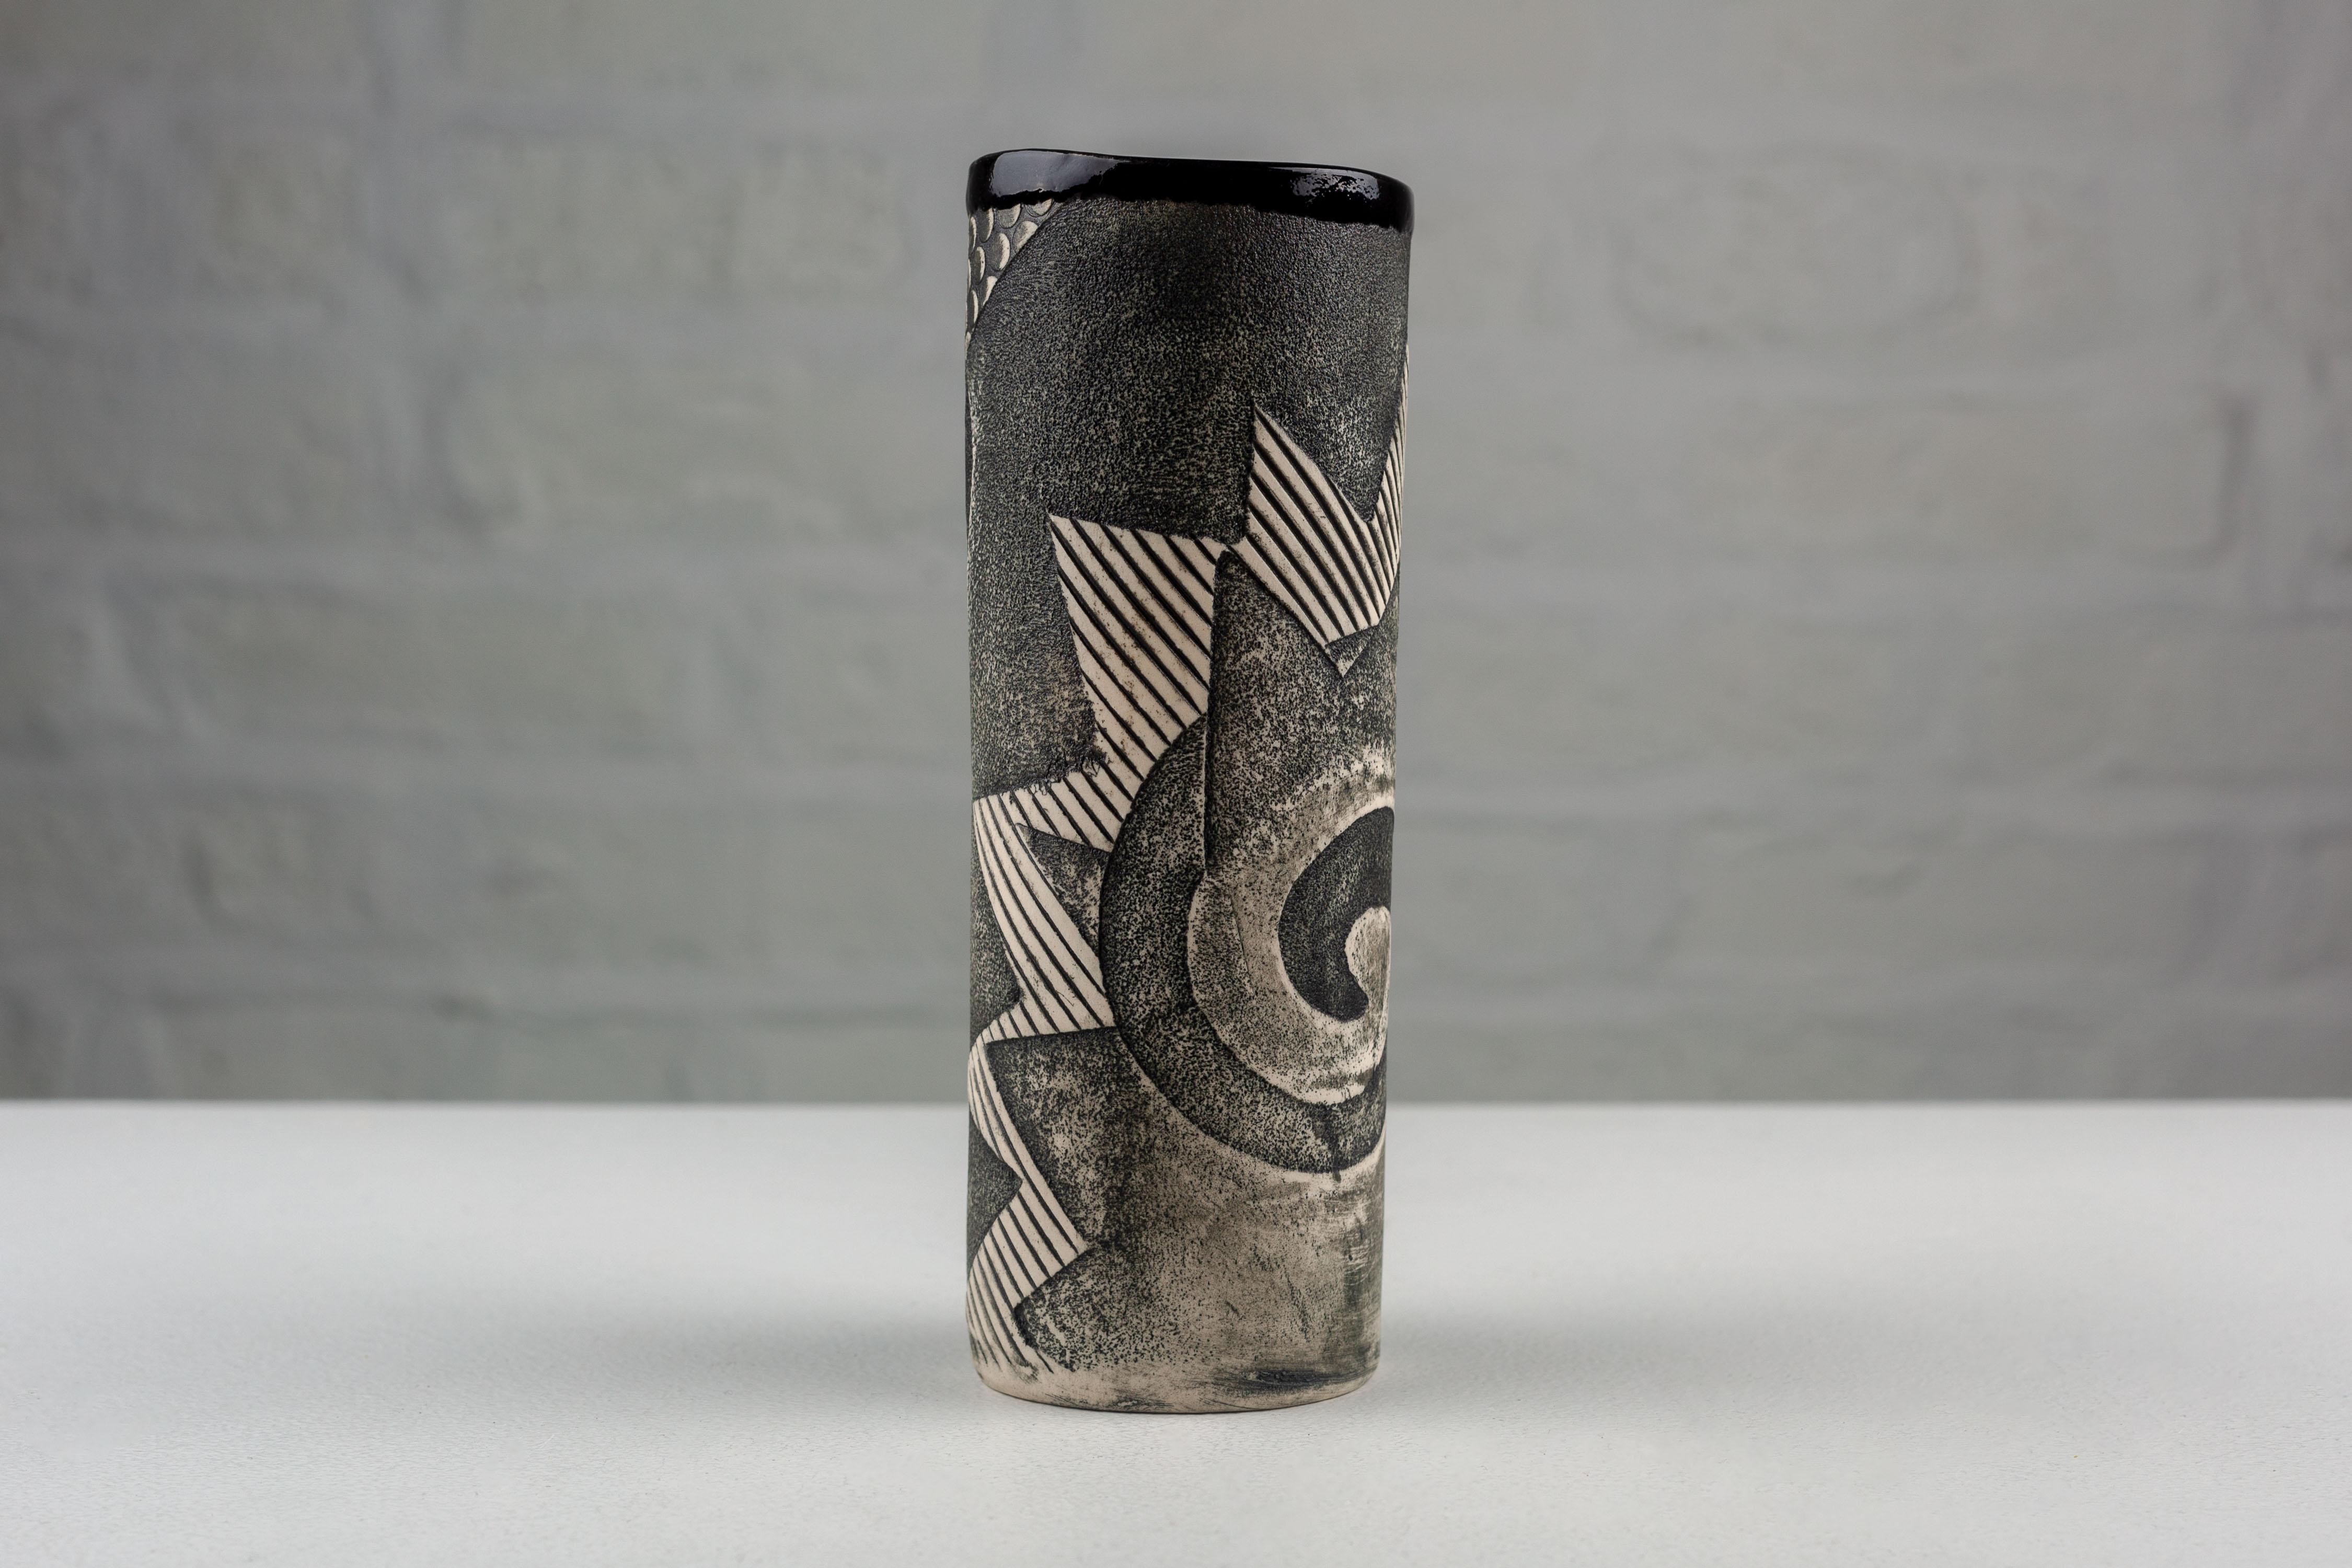 Created by Anne Schiesel-Harris and Phillip Harris at ASH WORKS, this 1991 porcelain vase embodies the post-modern design ethos. Its cylindrical form serves as a canvas for a pattern of spirals and zigzag lines, reminiscent of motifs prevalent